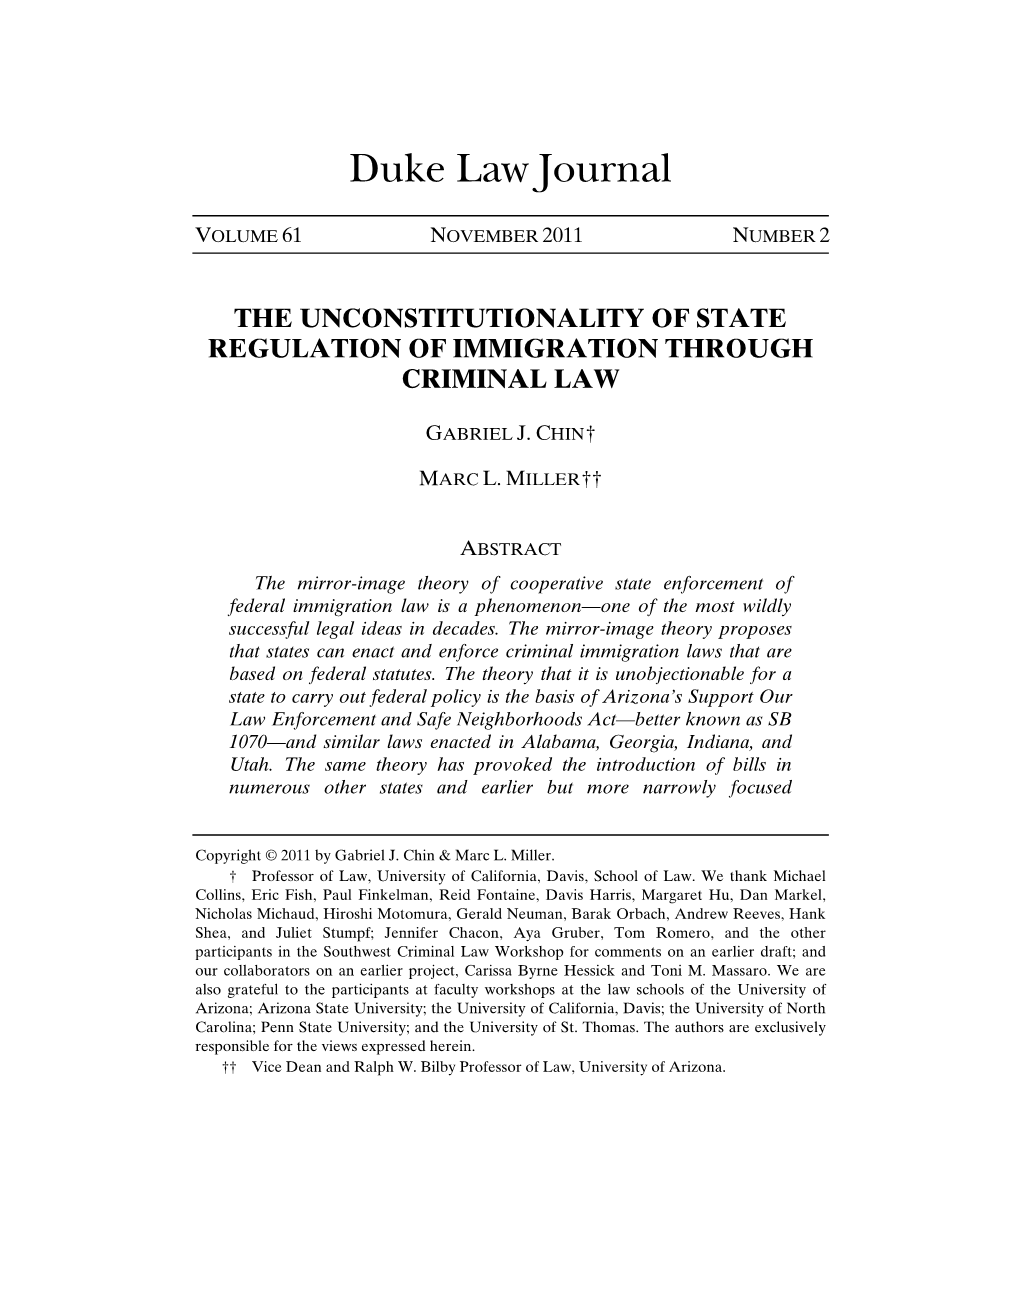 The Unconstitutionality of State Regulation of Immigration Through Criminal Law